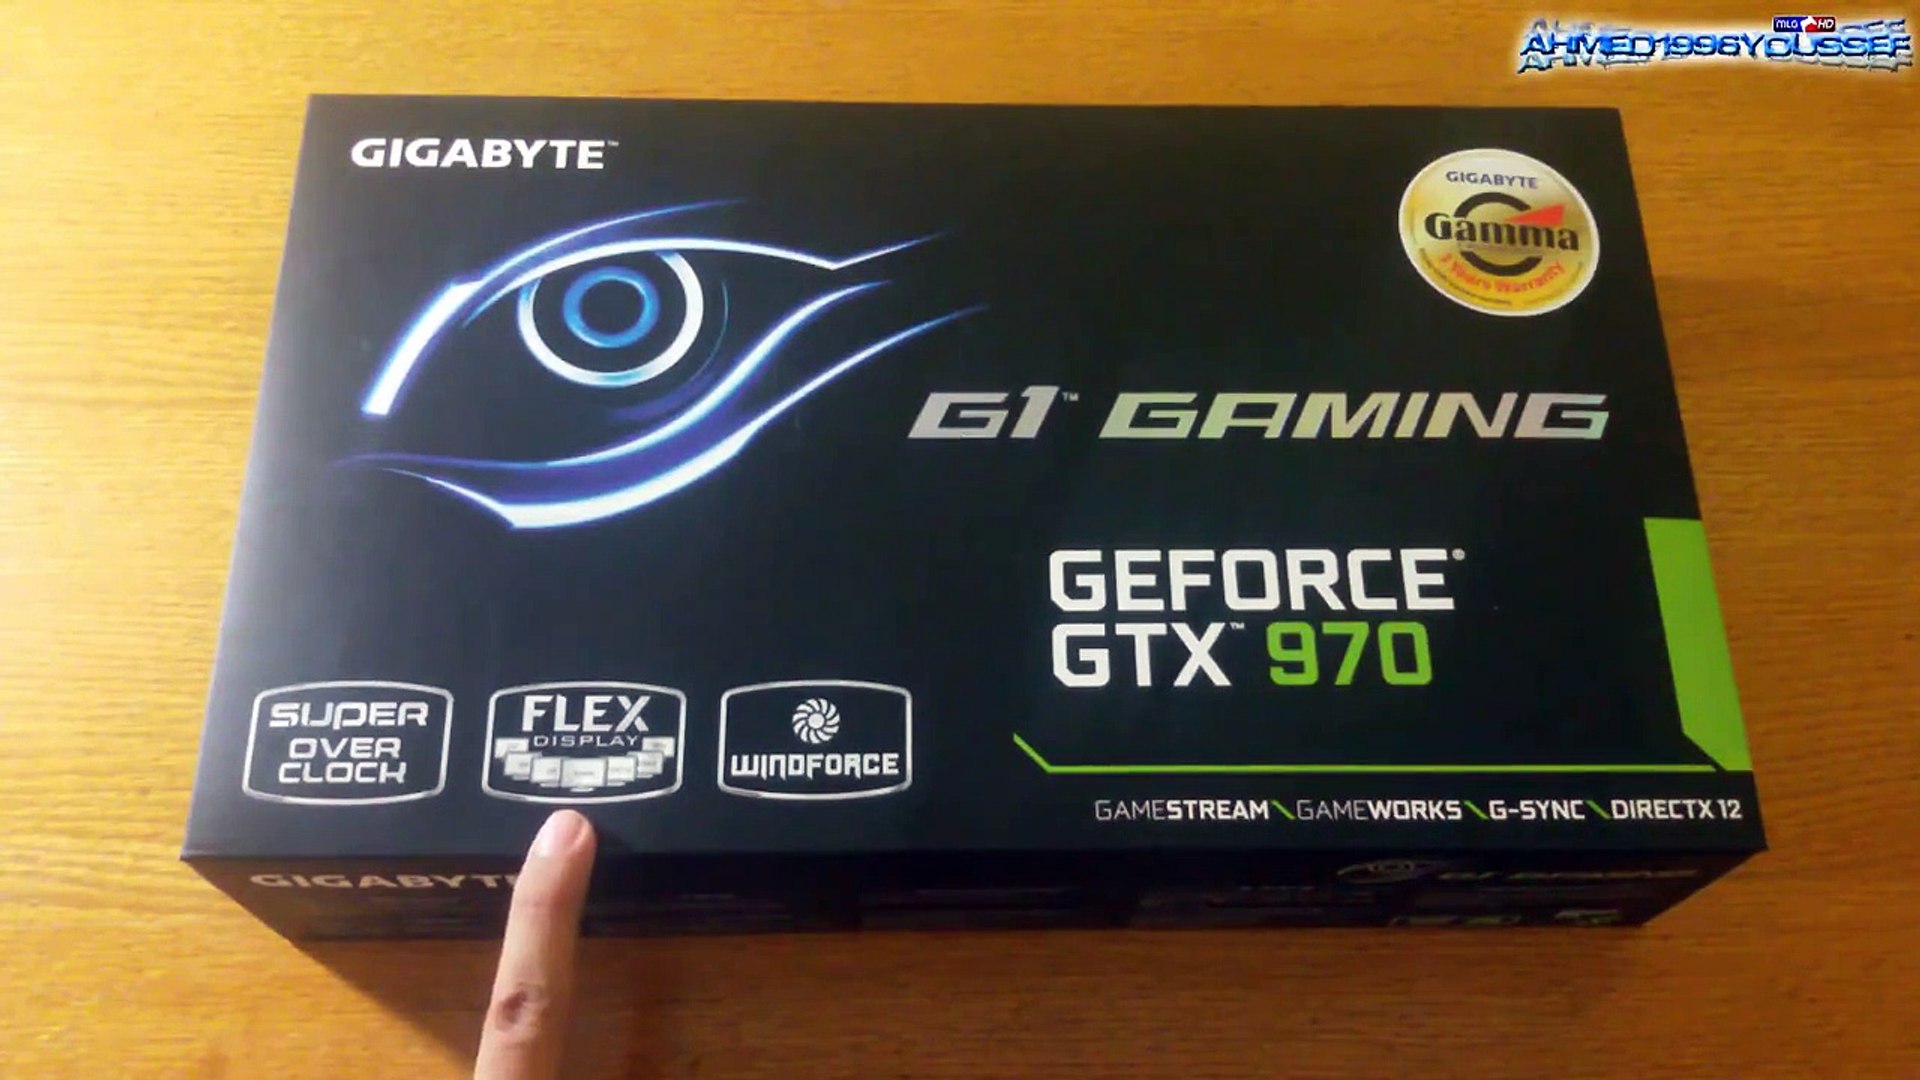 Gigabyte GTX 970 G1 Gaming Super Overclock Windforce Edition Unboxing and  Review - video Dailymotion